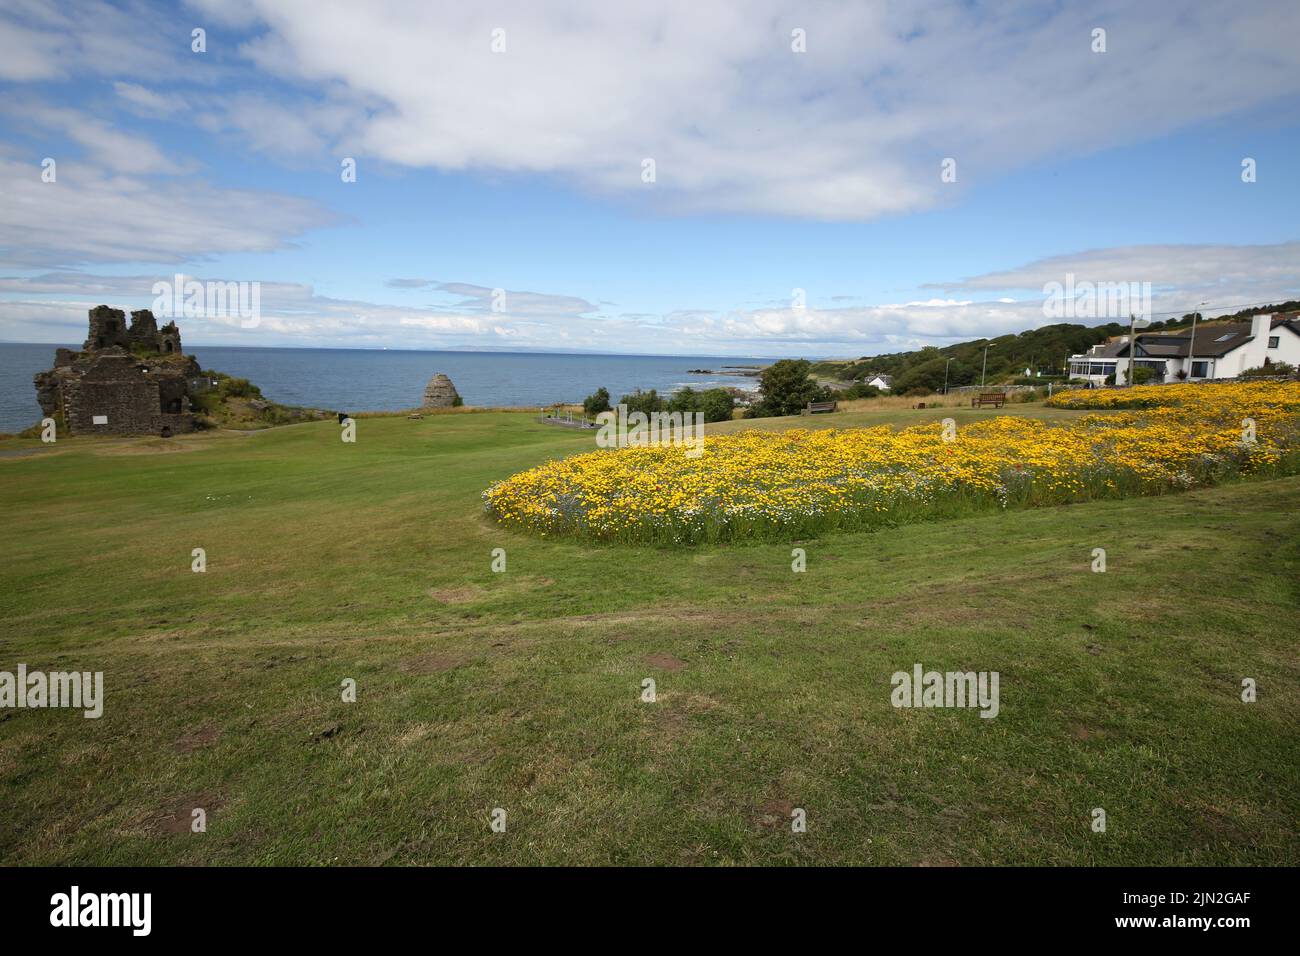 Kennedy Park, Dunure, Ayrshire, Scotland, UK  has been planted with wild flower meadow patches by the local authority South Ayrshire Council. Photo show the large expanse of the meadow with the village of Dunure in the background Stock Photo